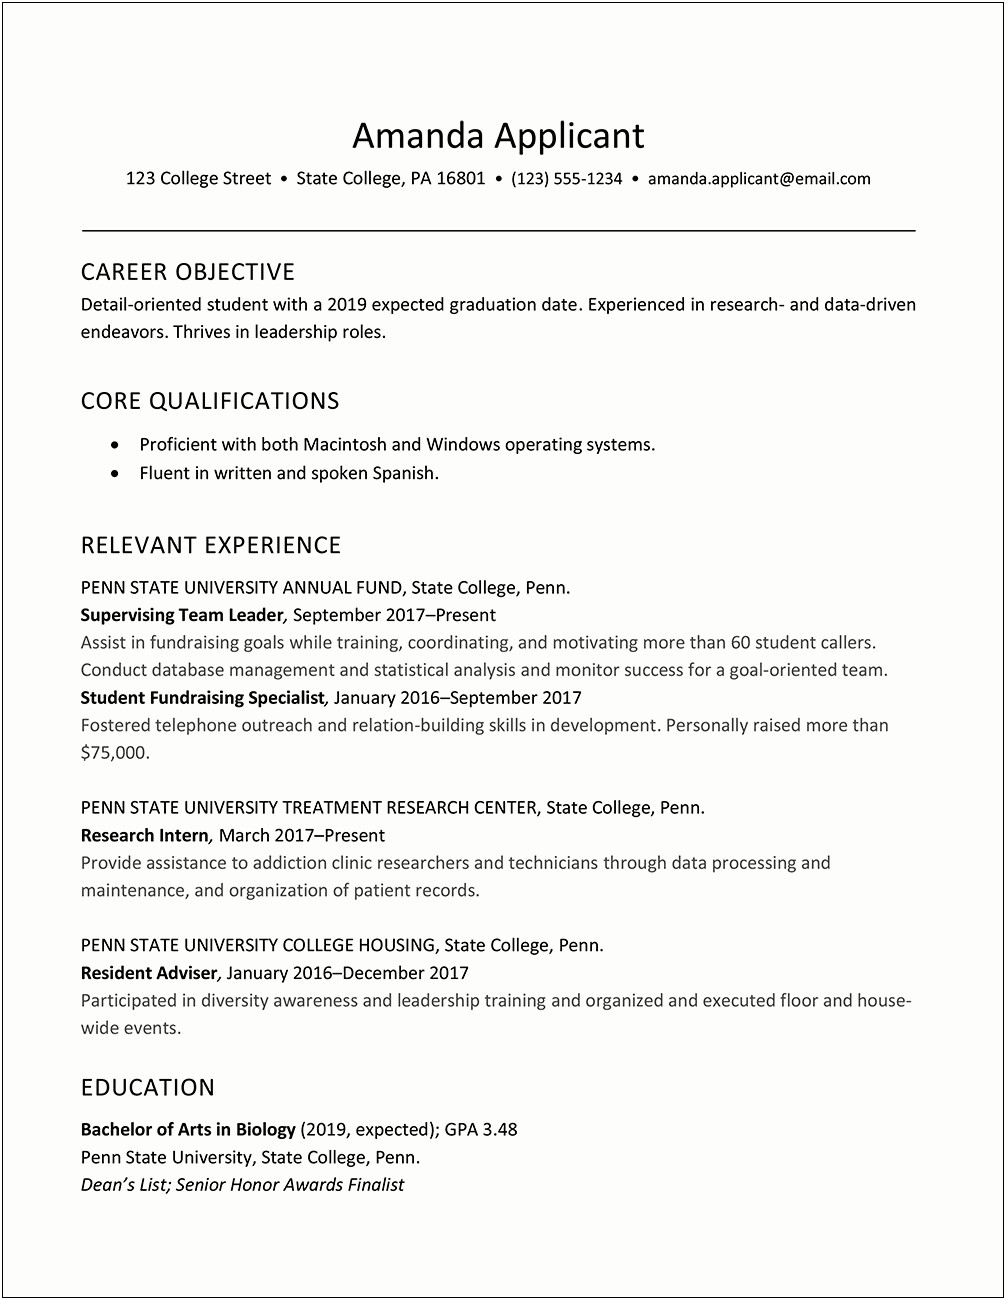 College Student Resume Skills Section